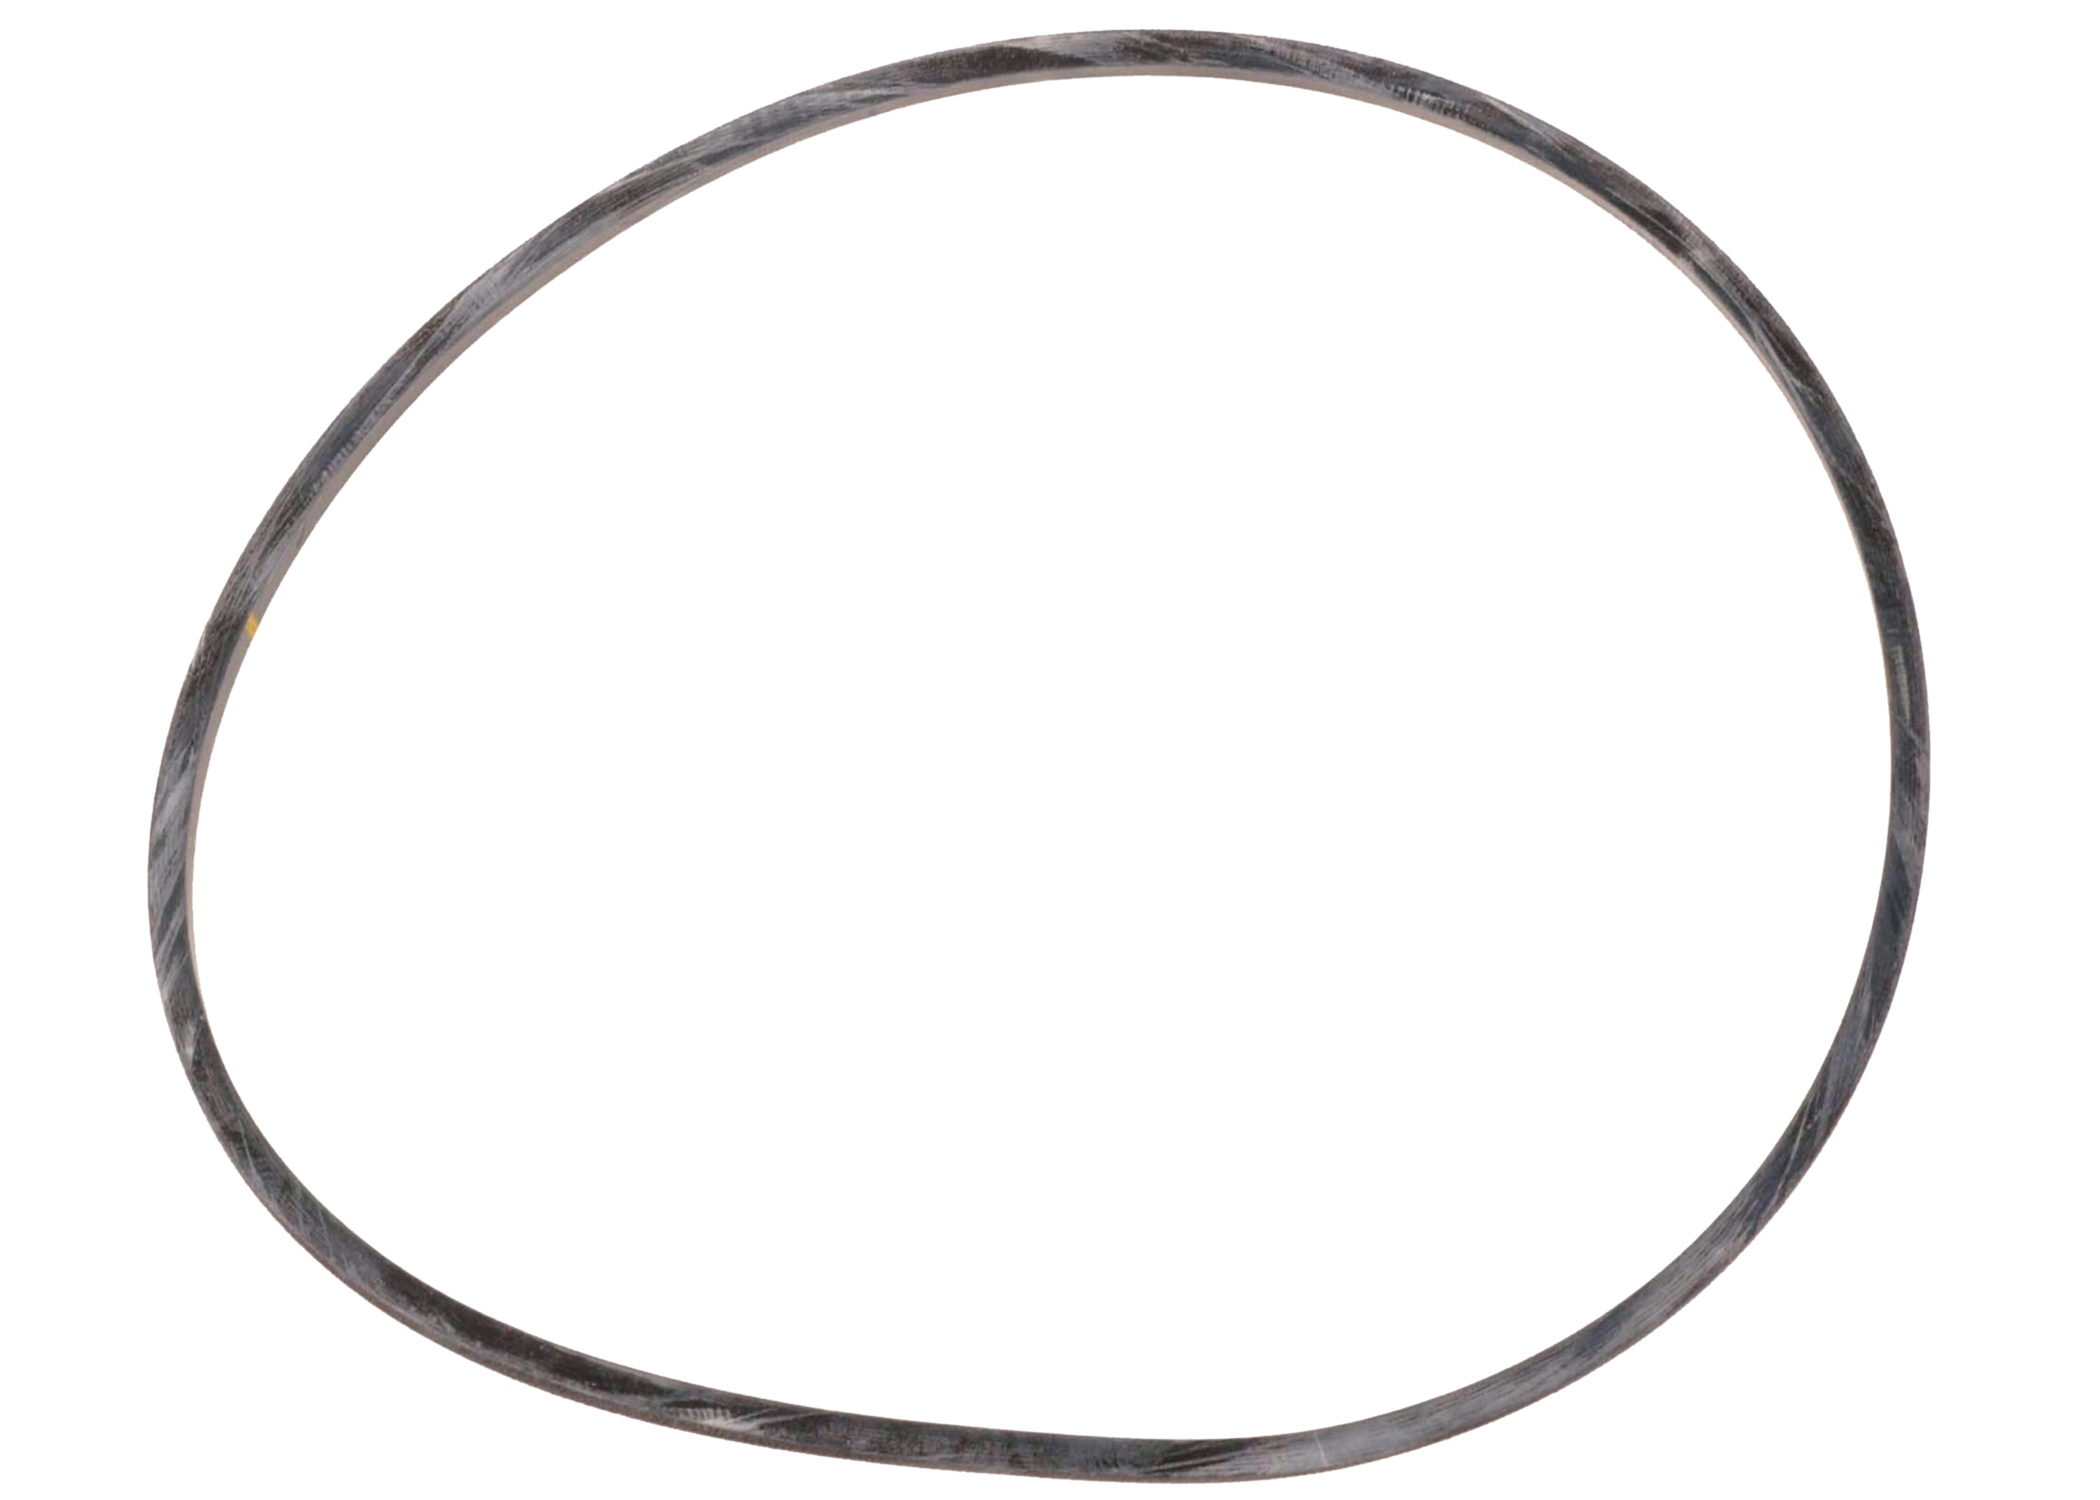 GM GENUINE PARTS - Automatic Transmission Extension Housing Gasket - GMP 8651419